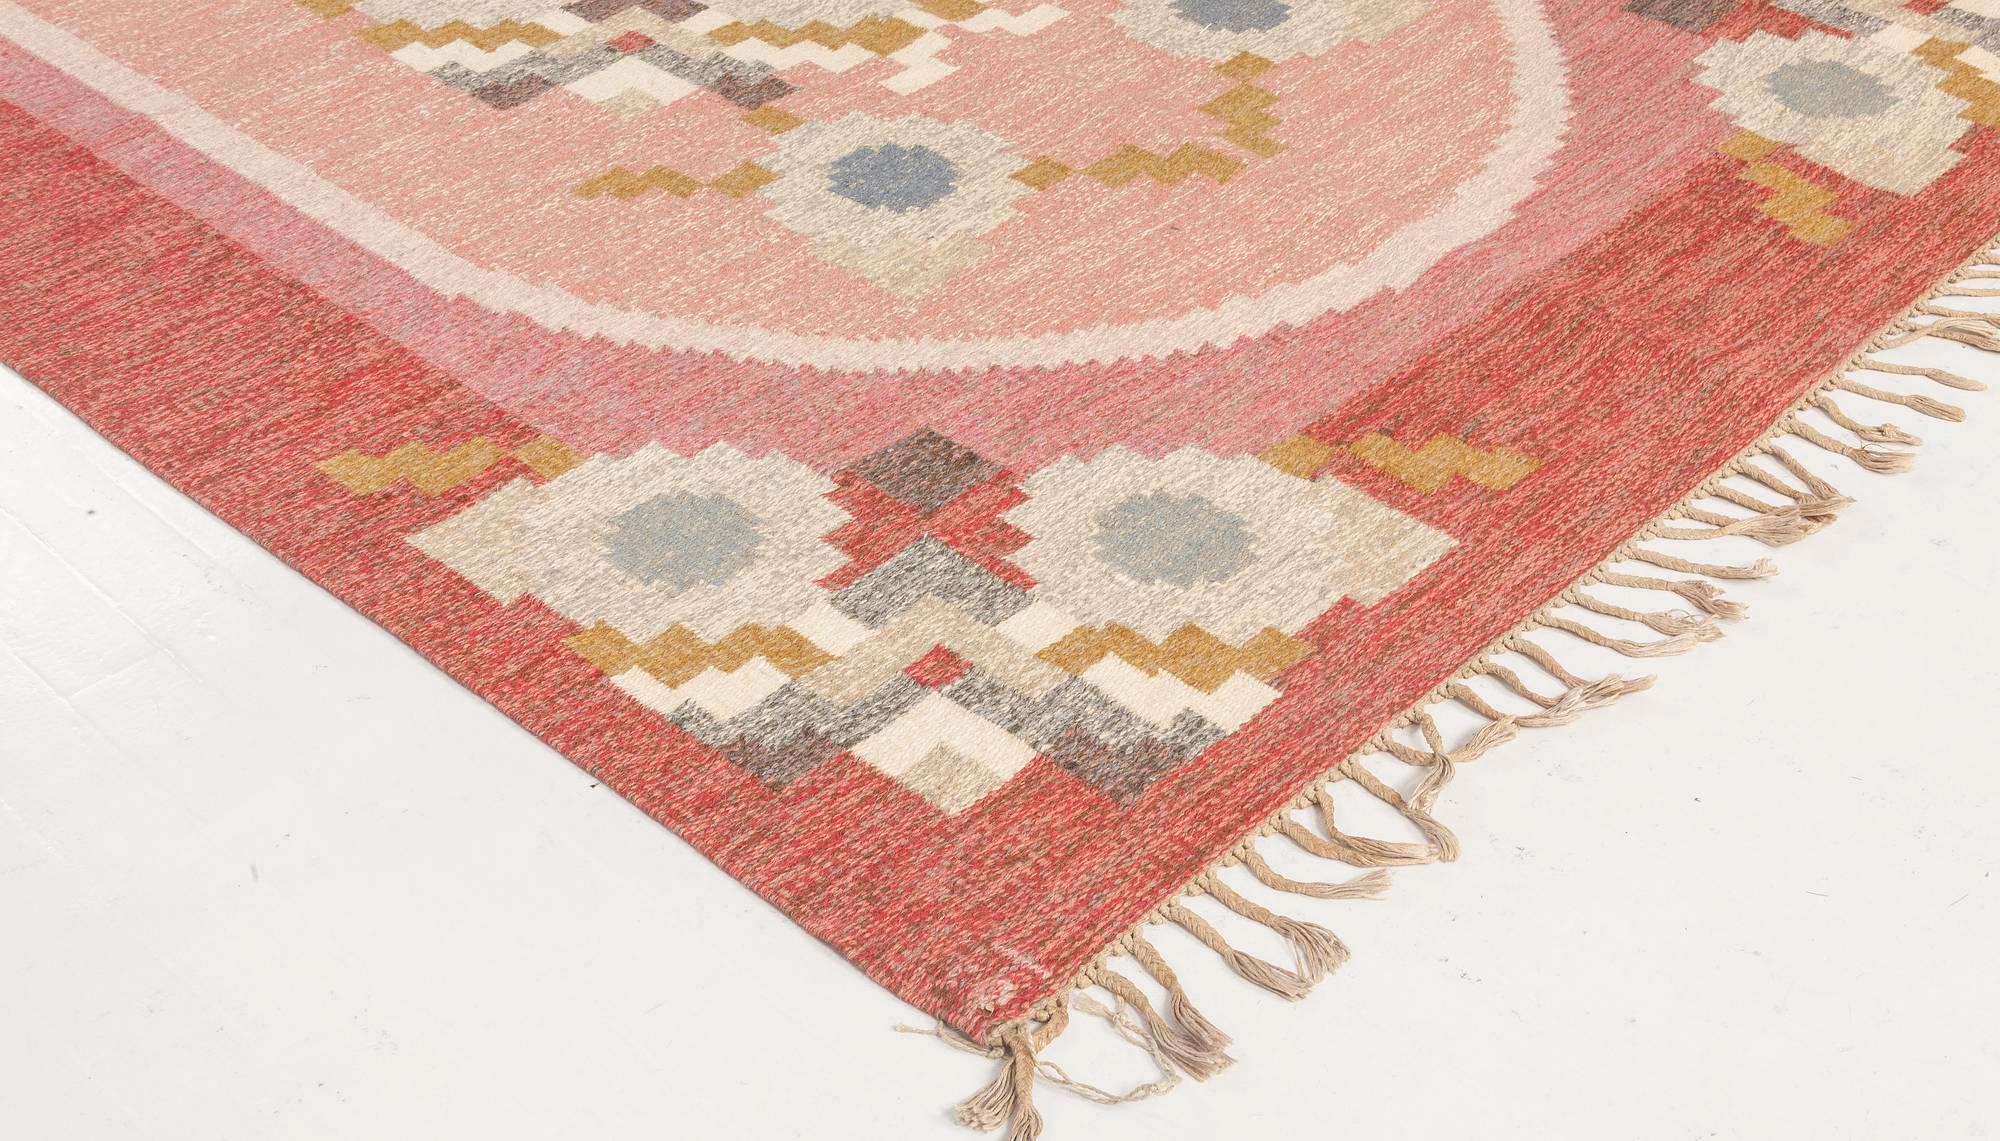 Midcentury Swedish Pink Flat-Weave Rug by Ingegerd Silow In Good Condition For Sale In New York, NY